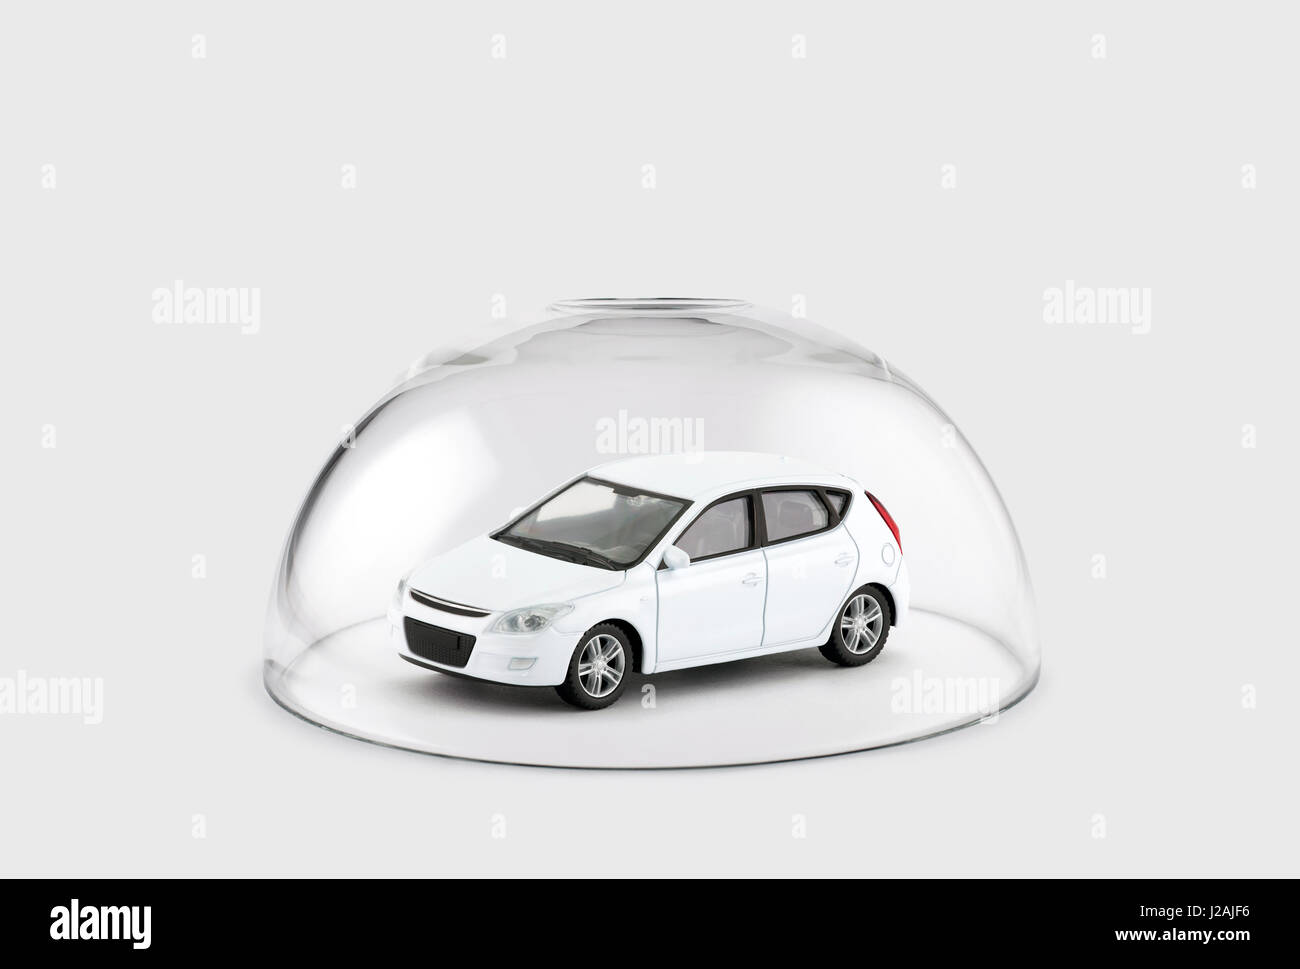 White car protected under a glass dome Stock Photo